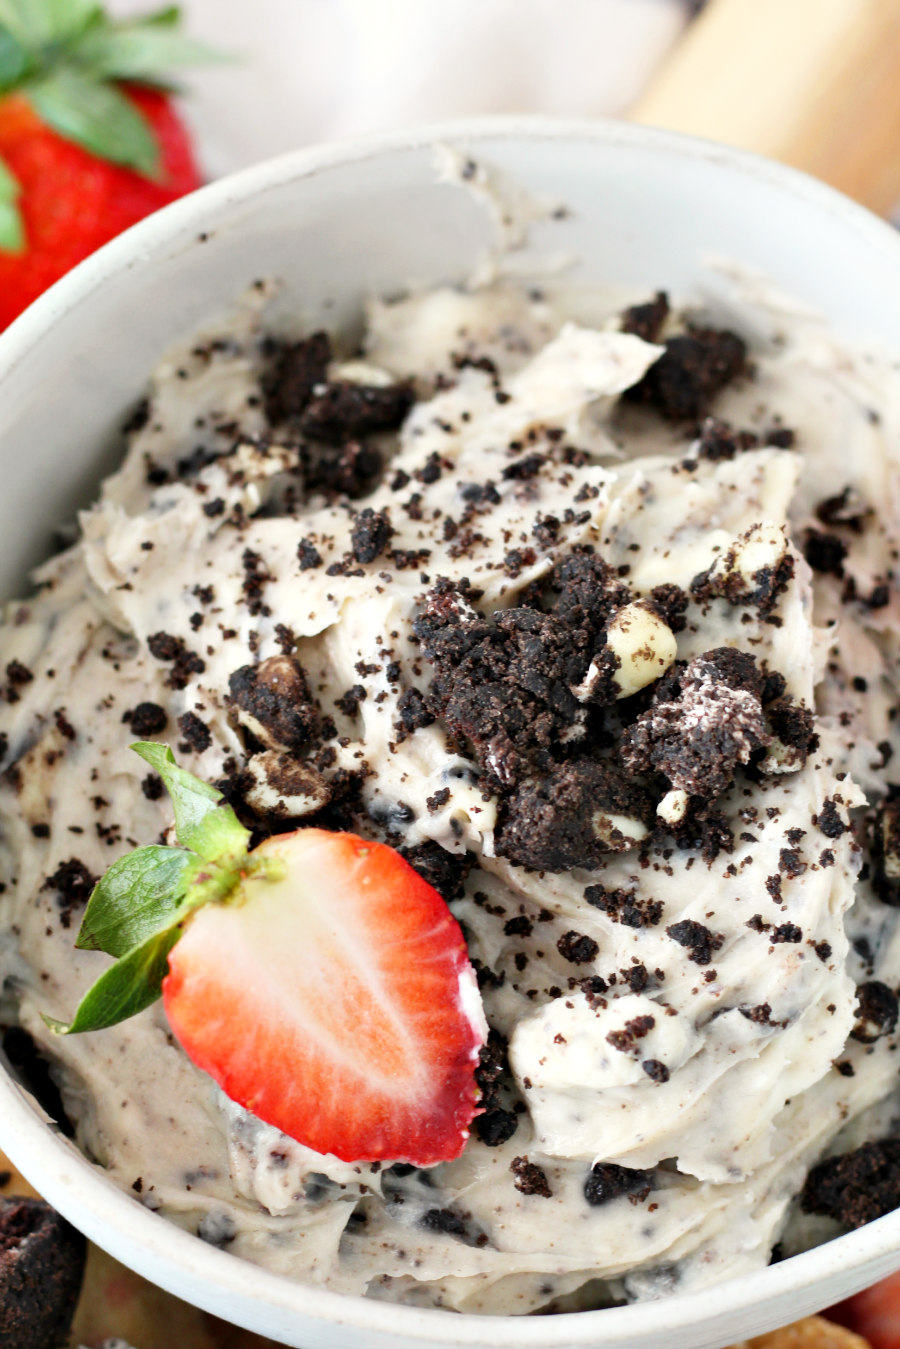 Close up of Cookies and Cream Cheese Dip in bowl with sliced strawberry. Strawberries can be seen in background.